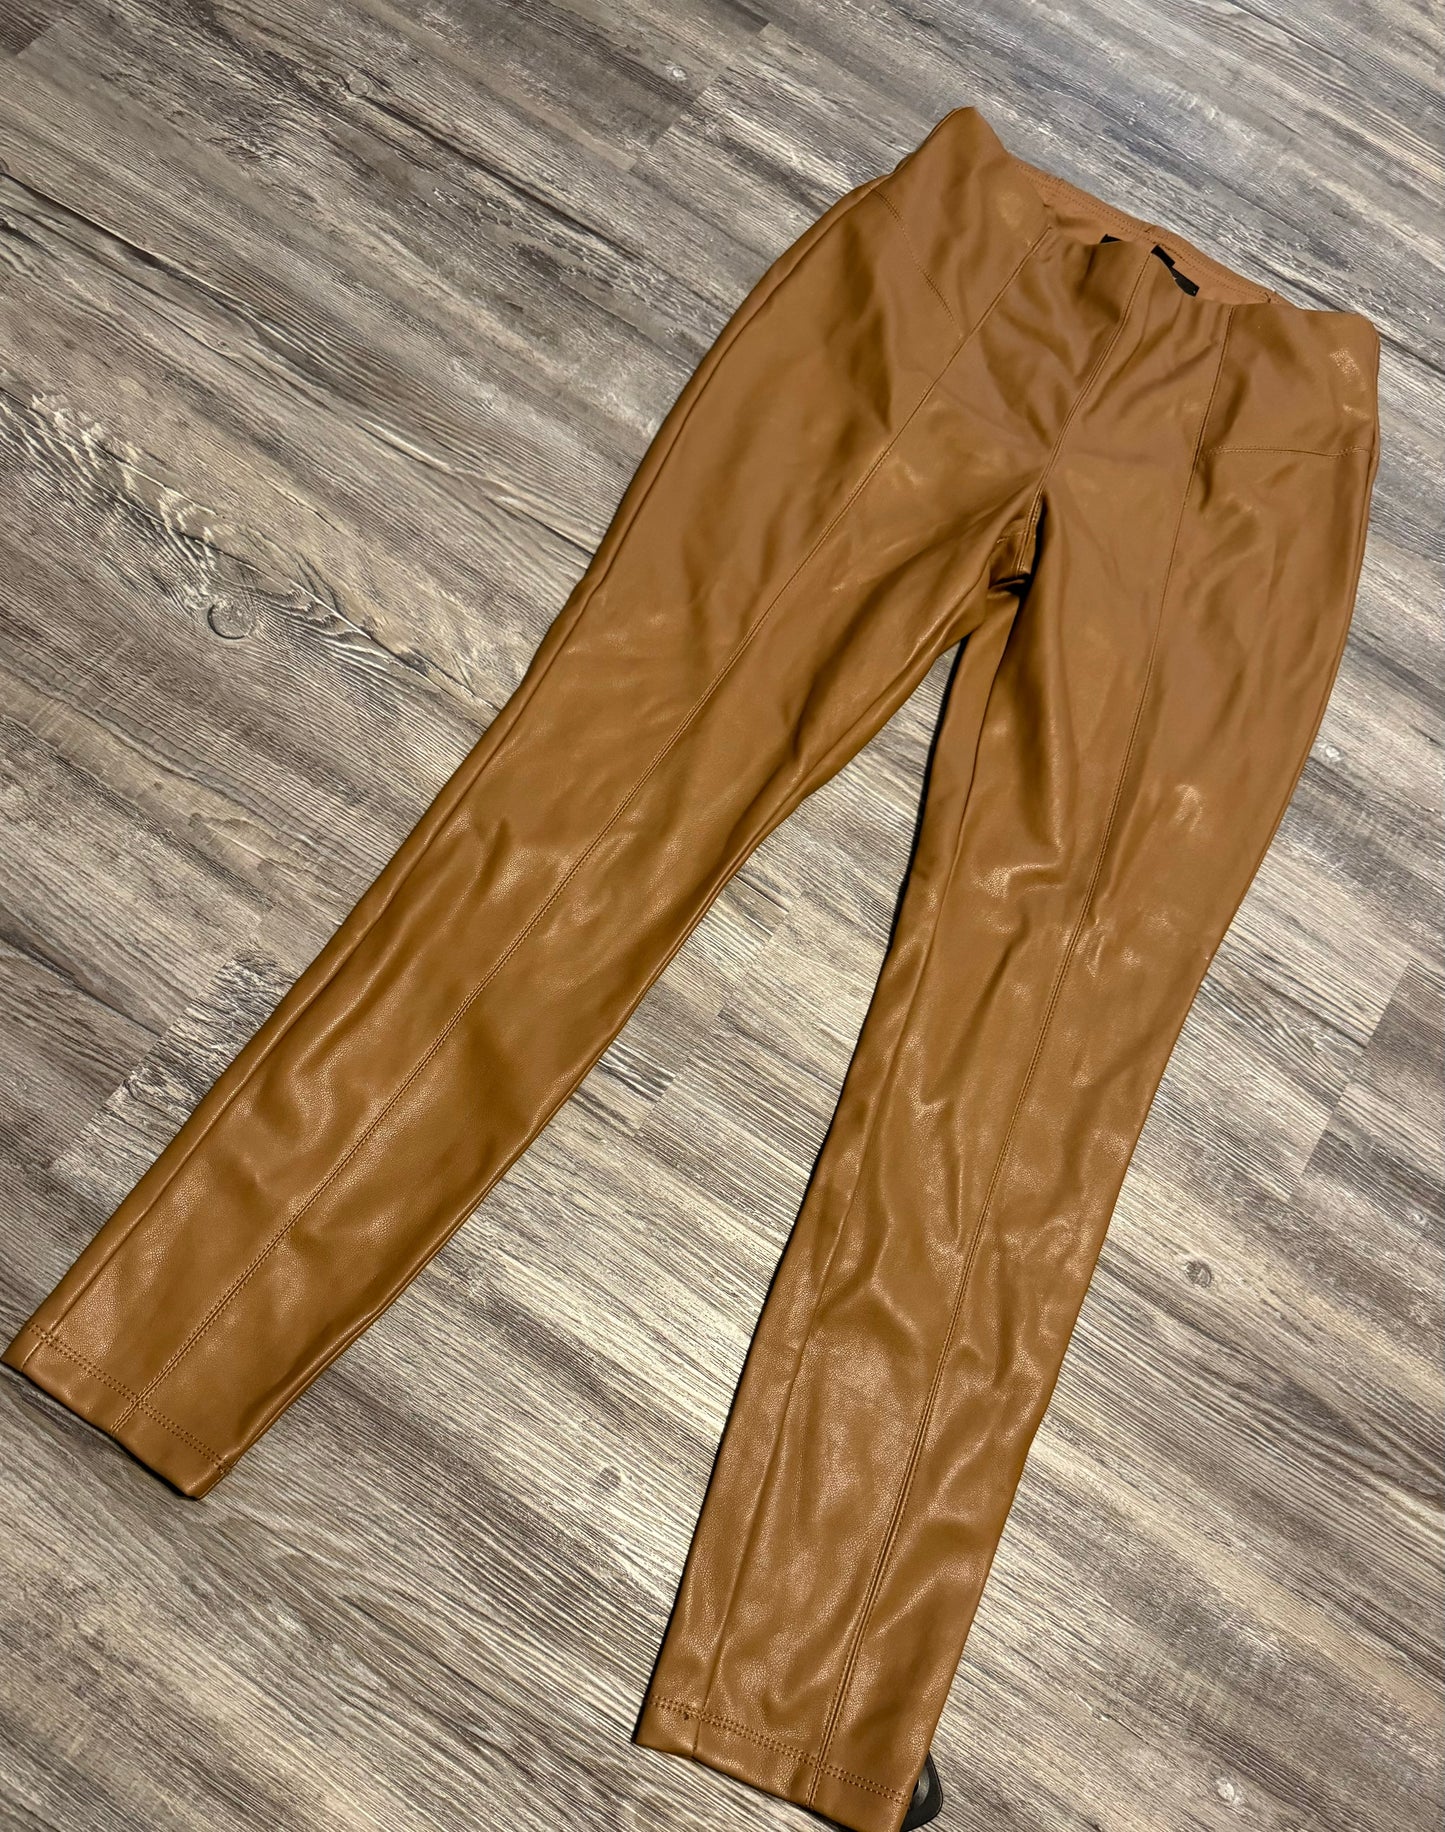 Pants Ankle By Marc New York  Size: Xs